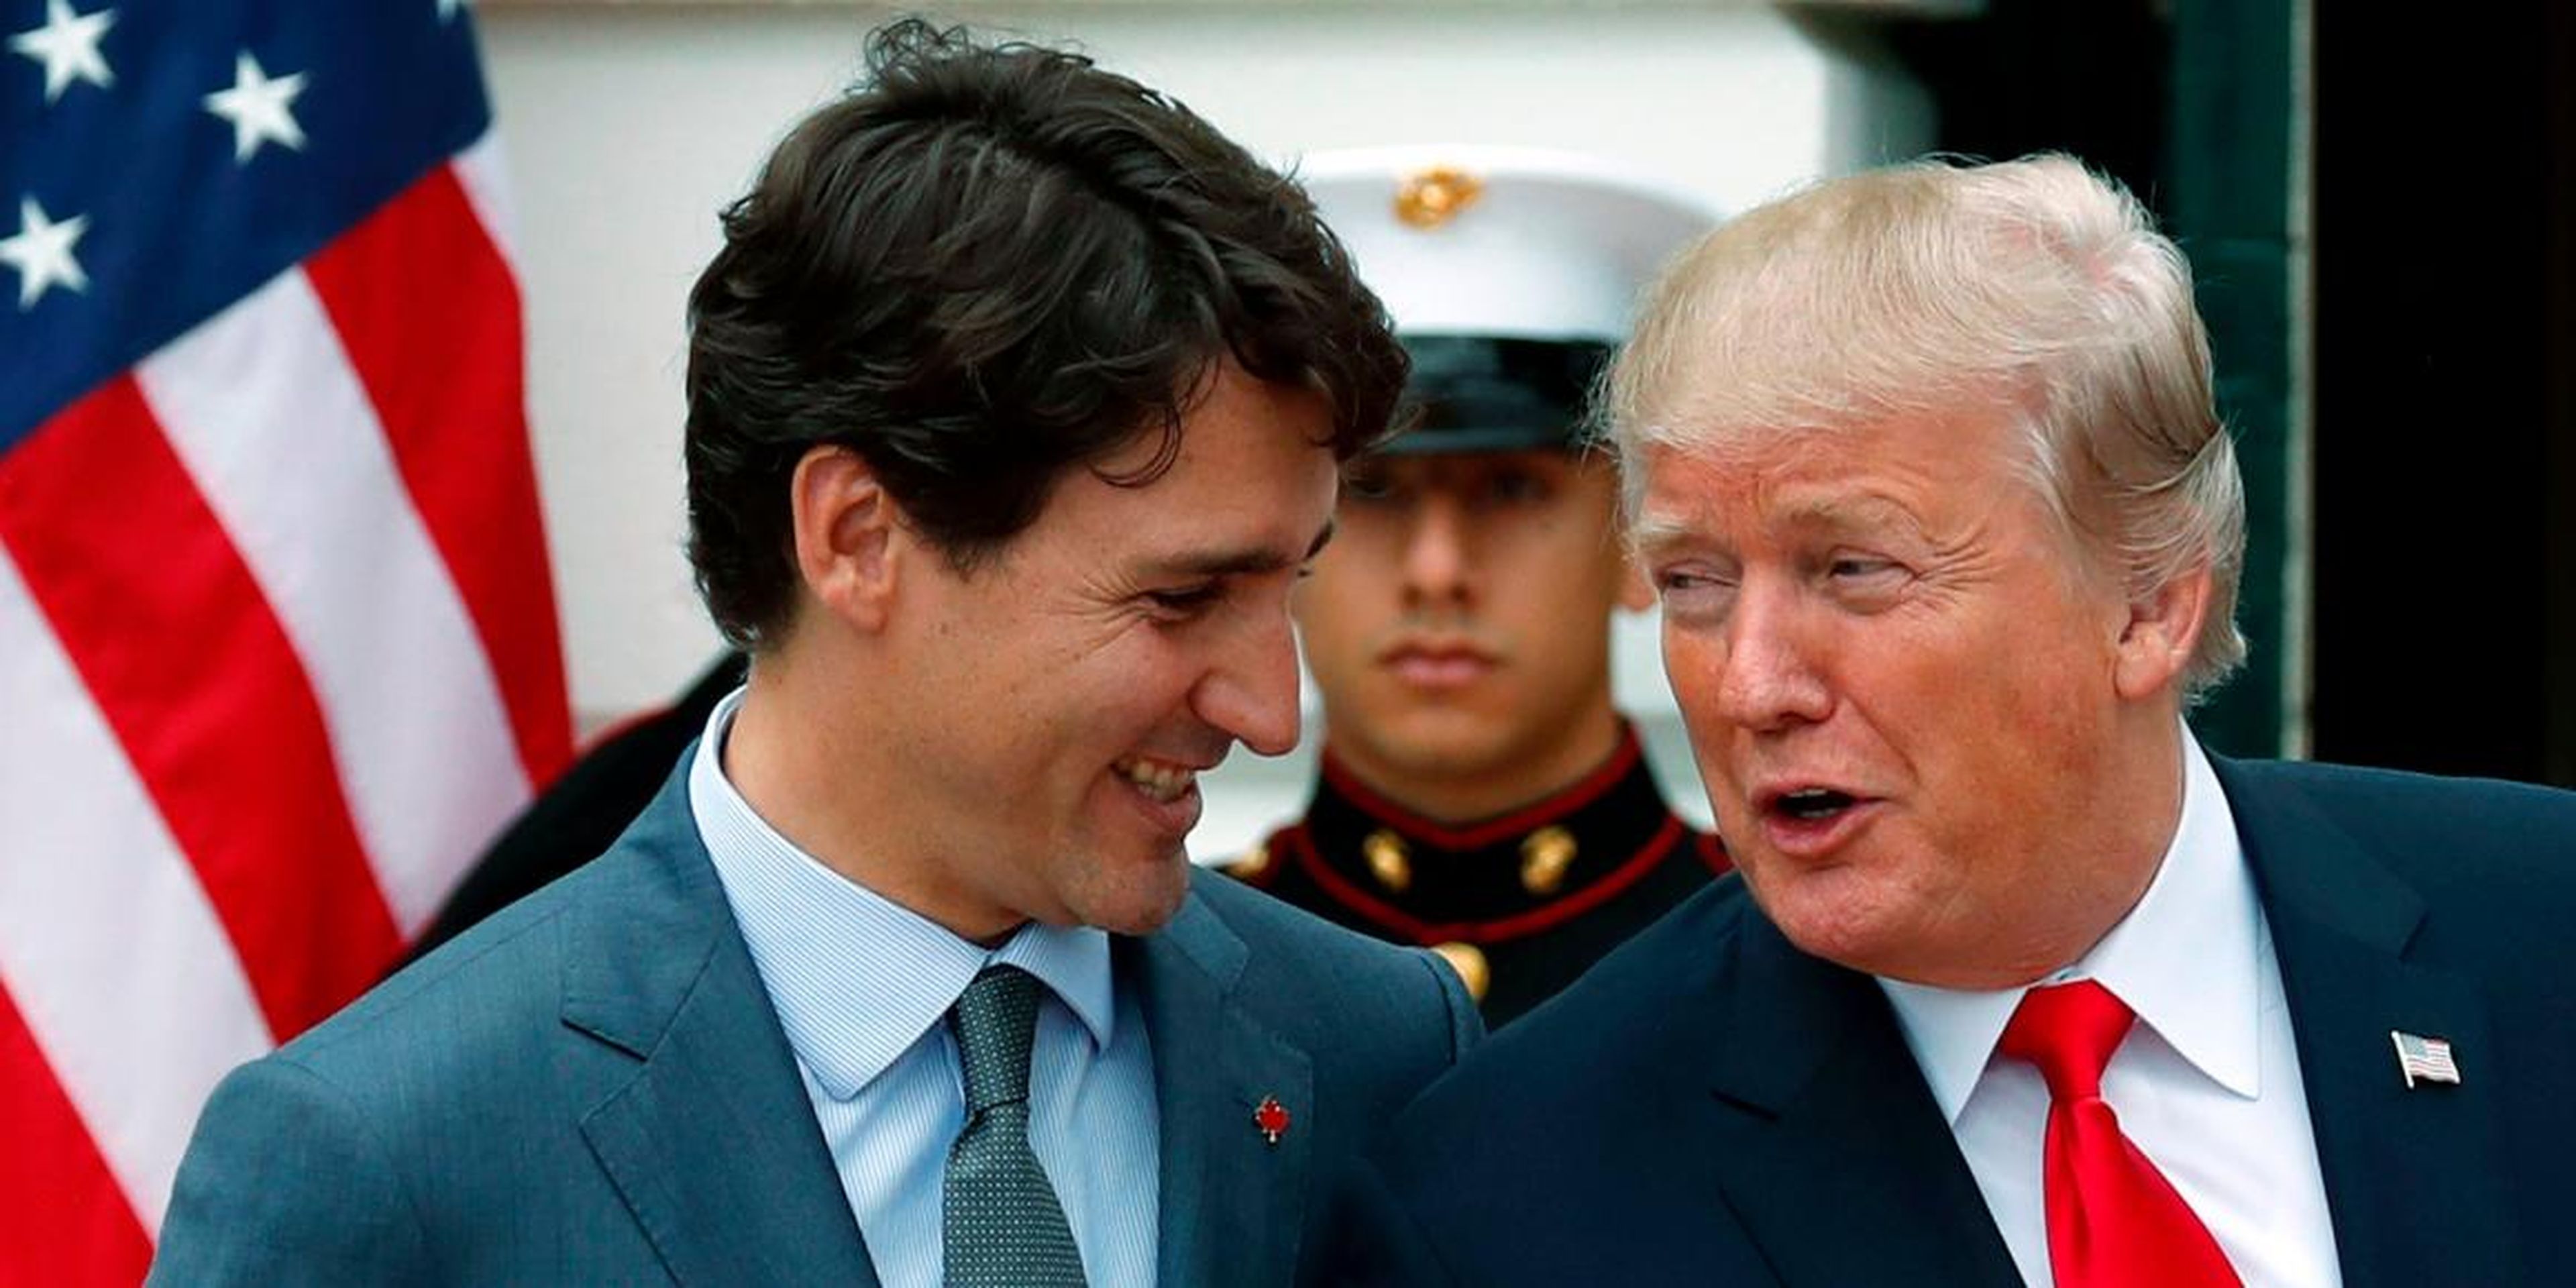 Canadian Prime Minster Justin Trudeau and US President Donald Trump